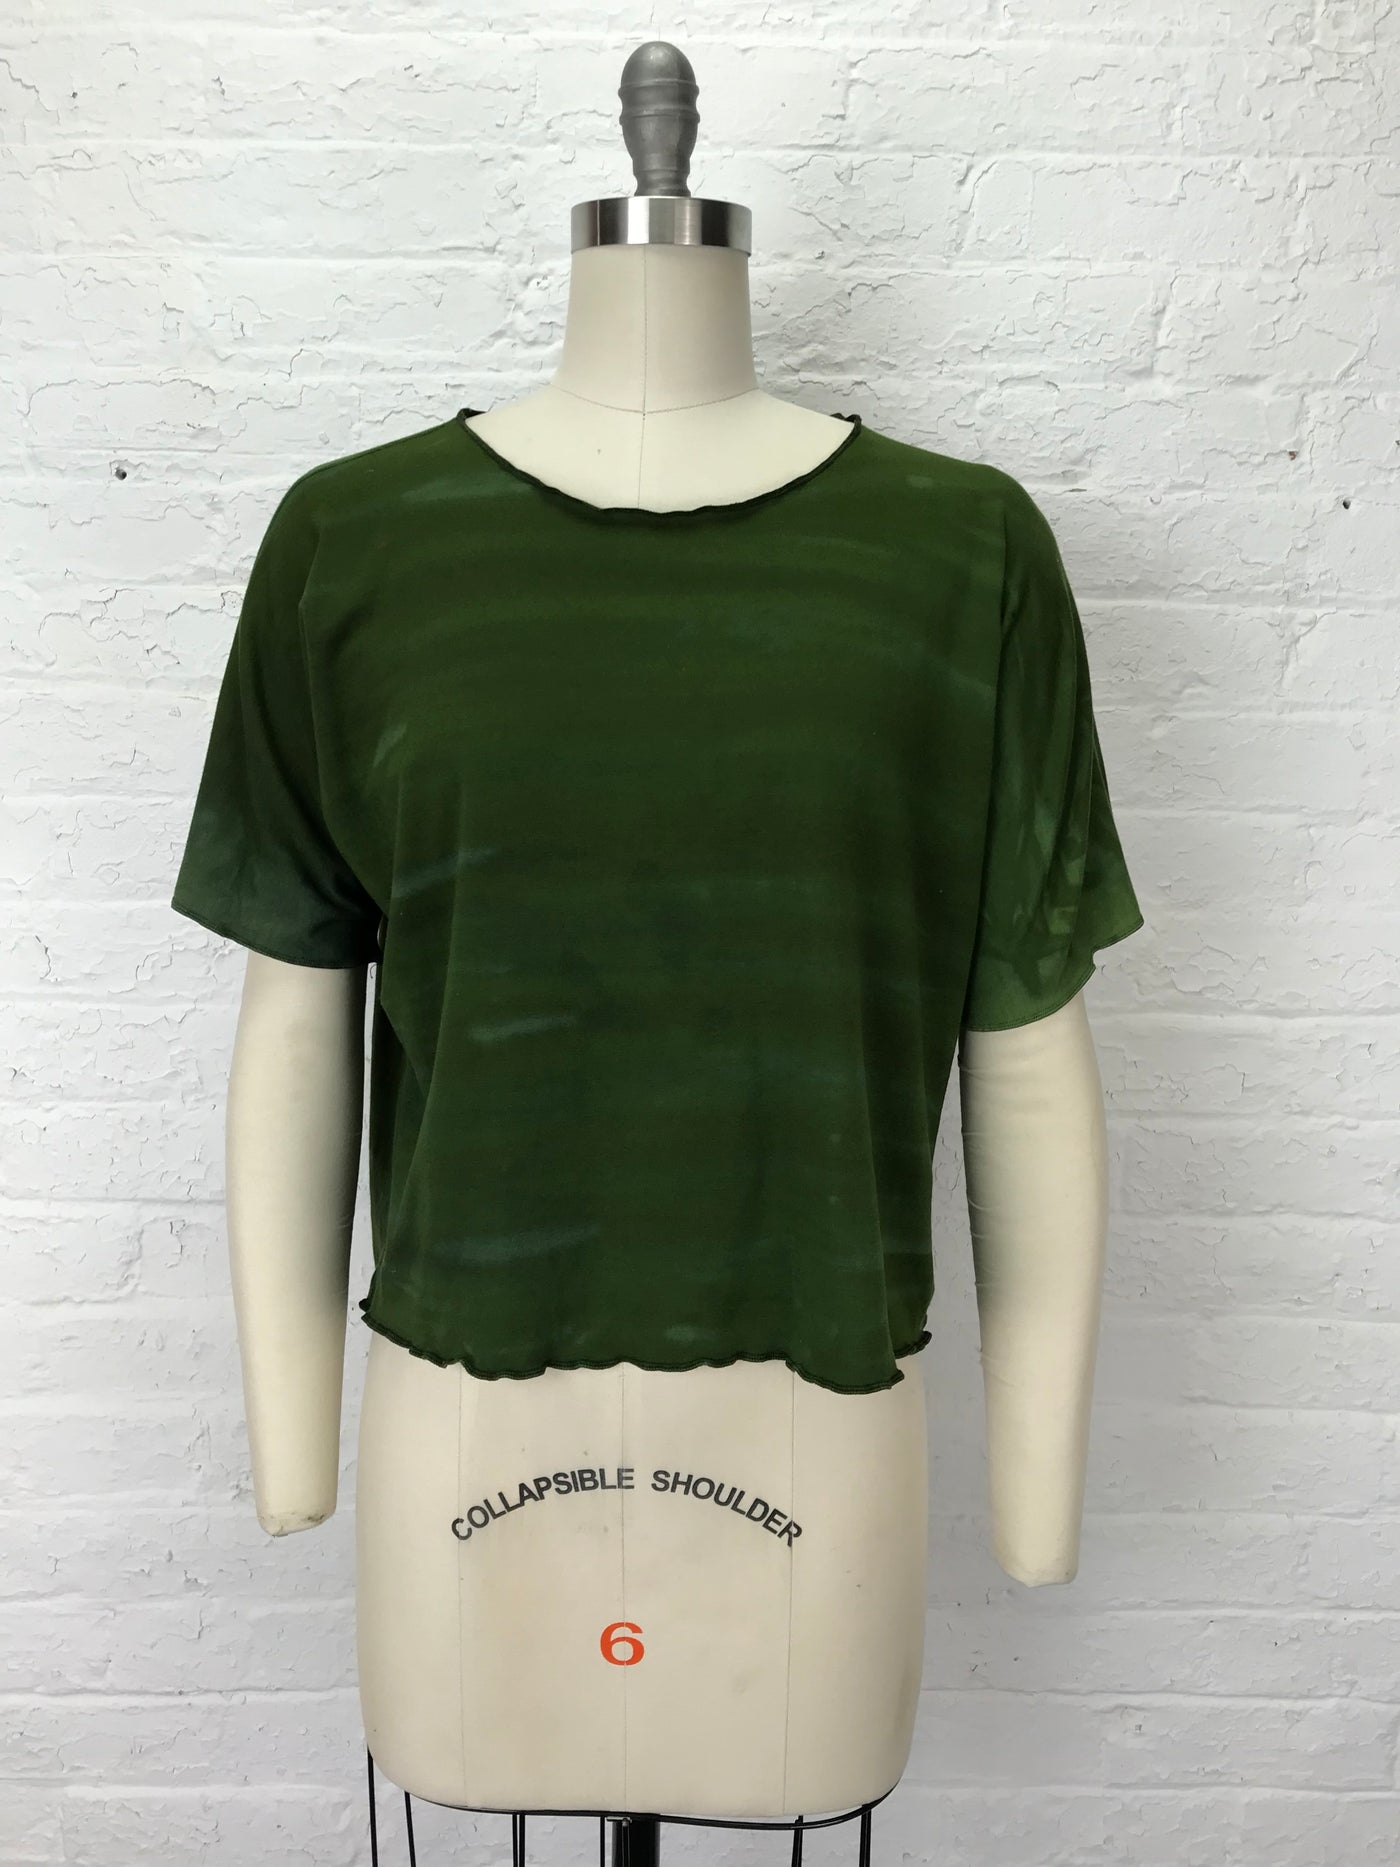 Juni Short Sleeve Petite Top in Emerald Forest - One size